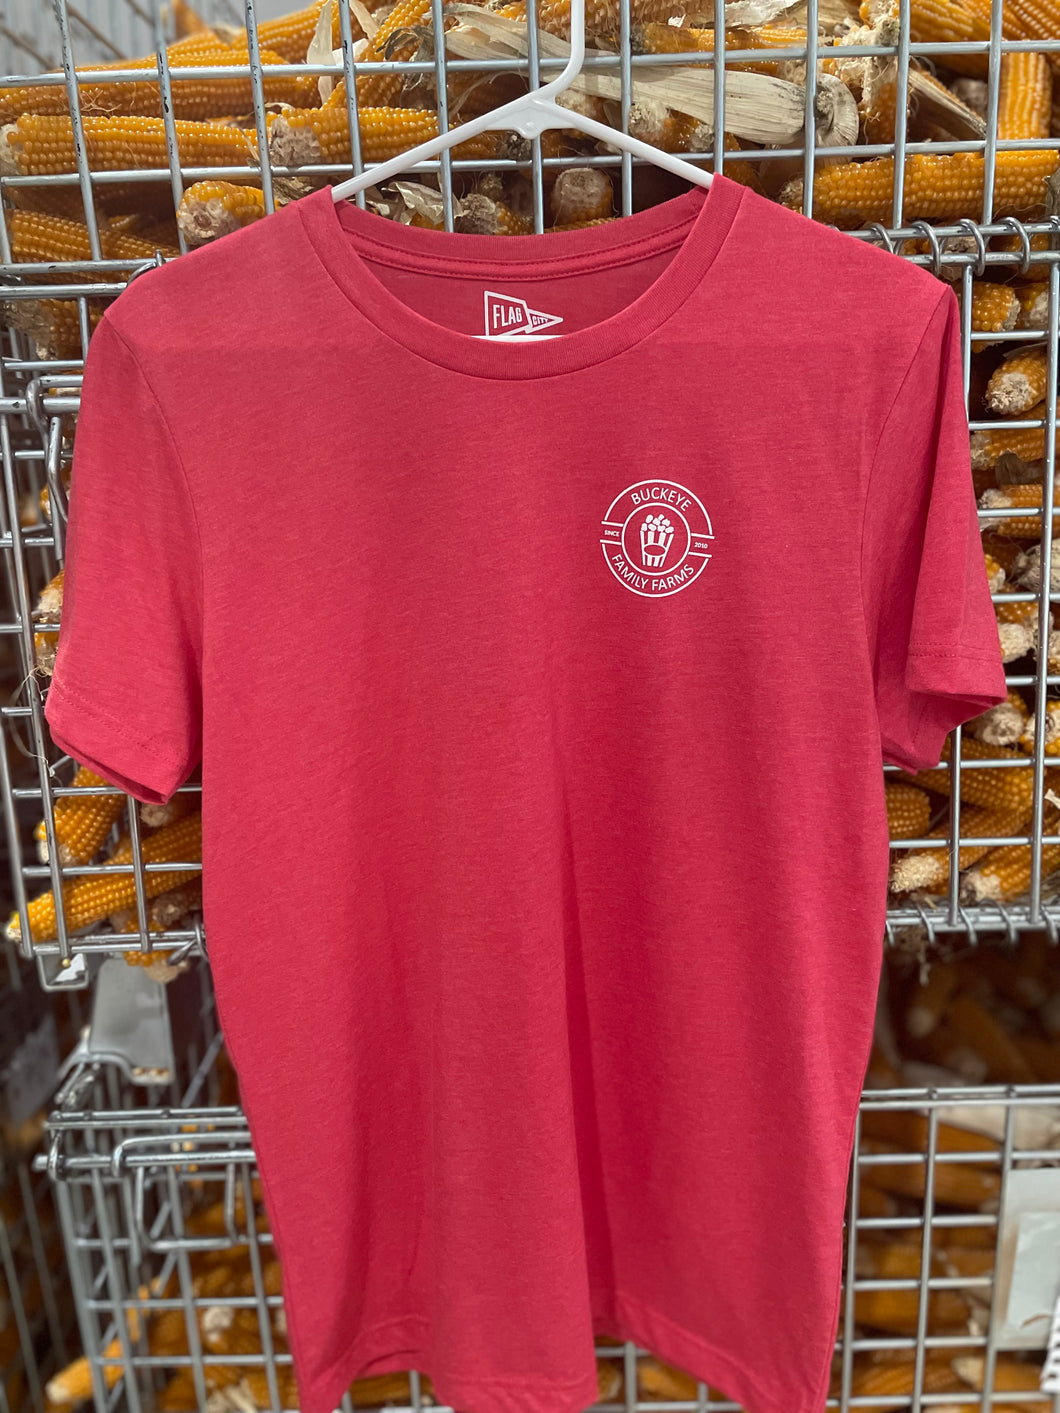 Buckeye Family Farms T-Shirt in Red